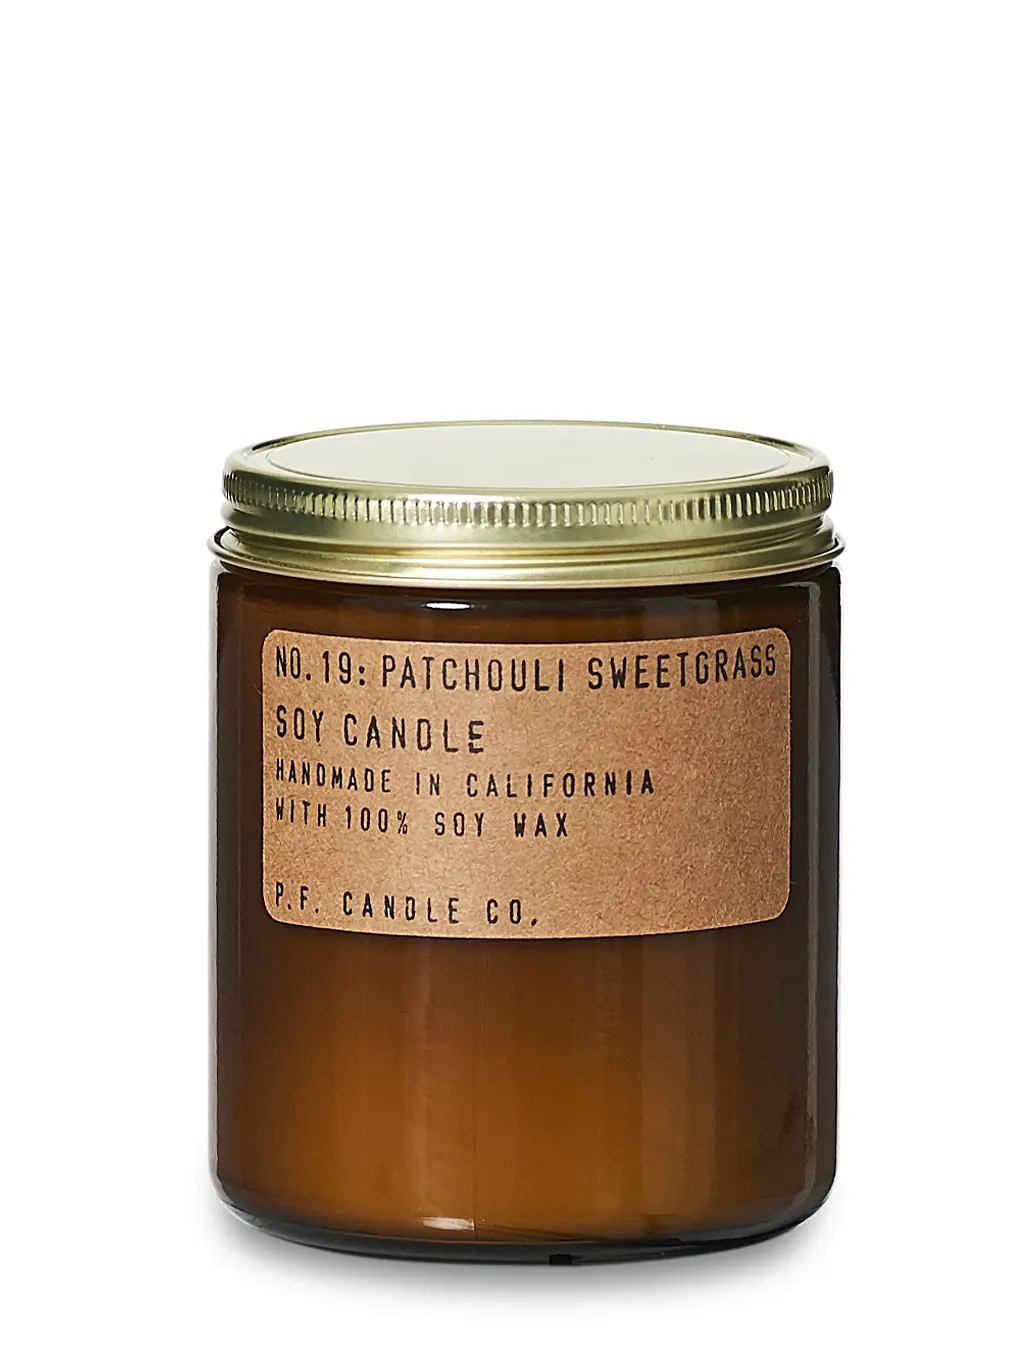 Patchouli Sweetgrass - scented soy candle, standard size